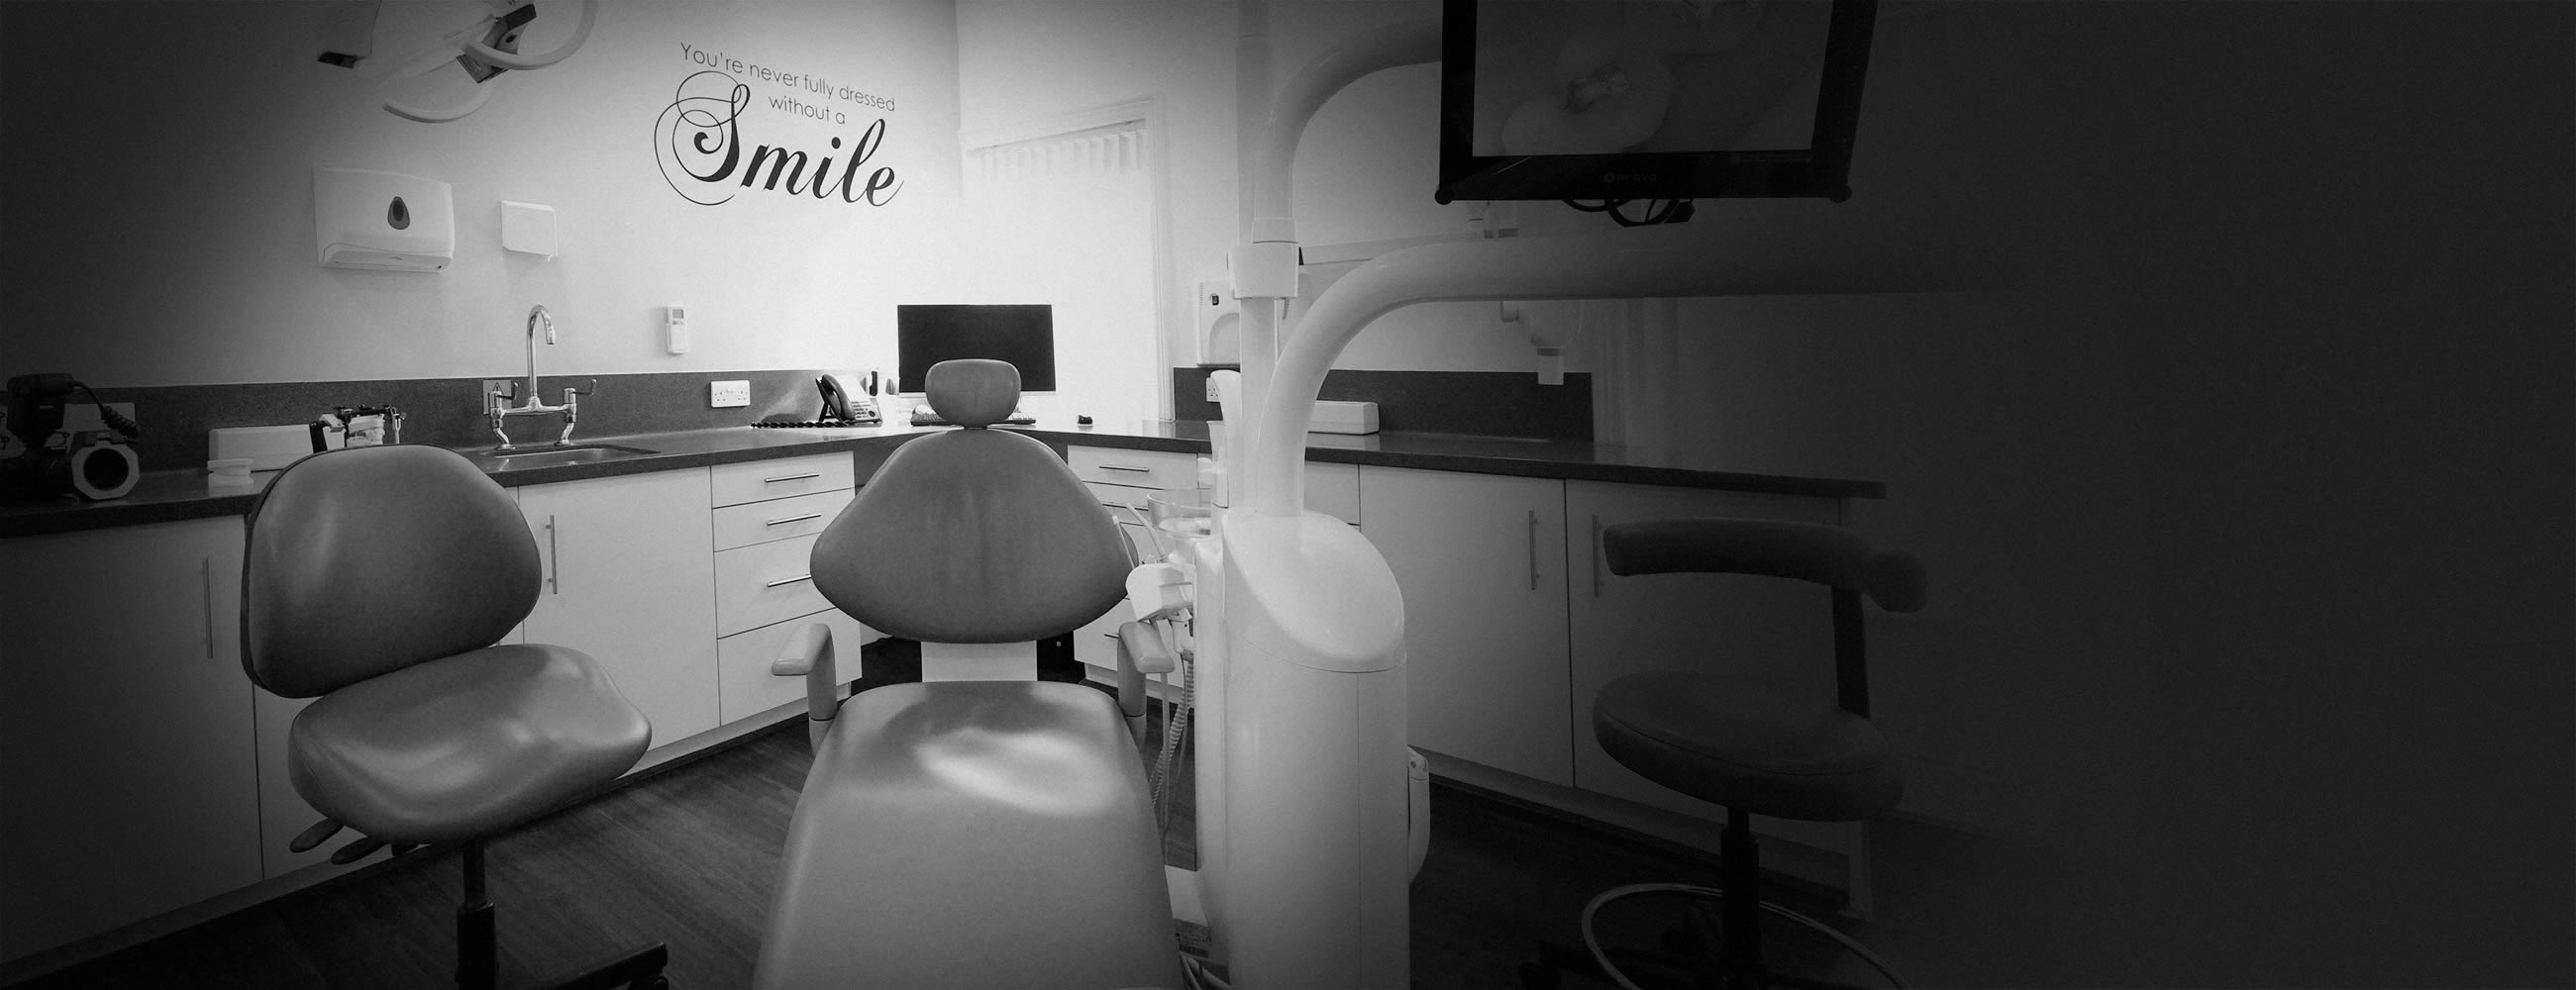 Our services at Dental Design Studio in Bolton